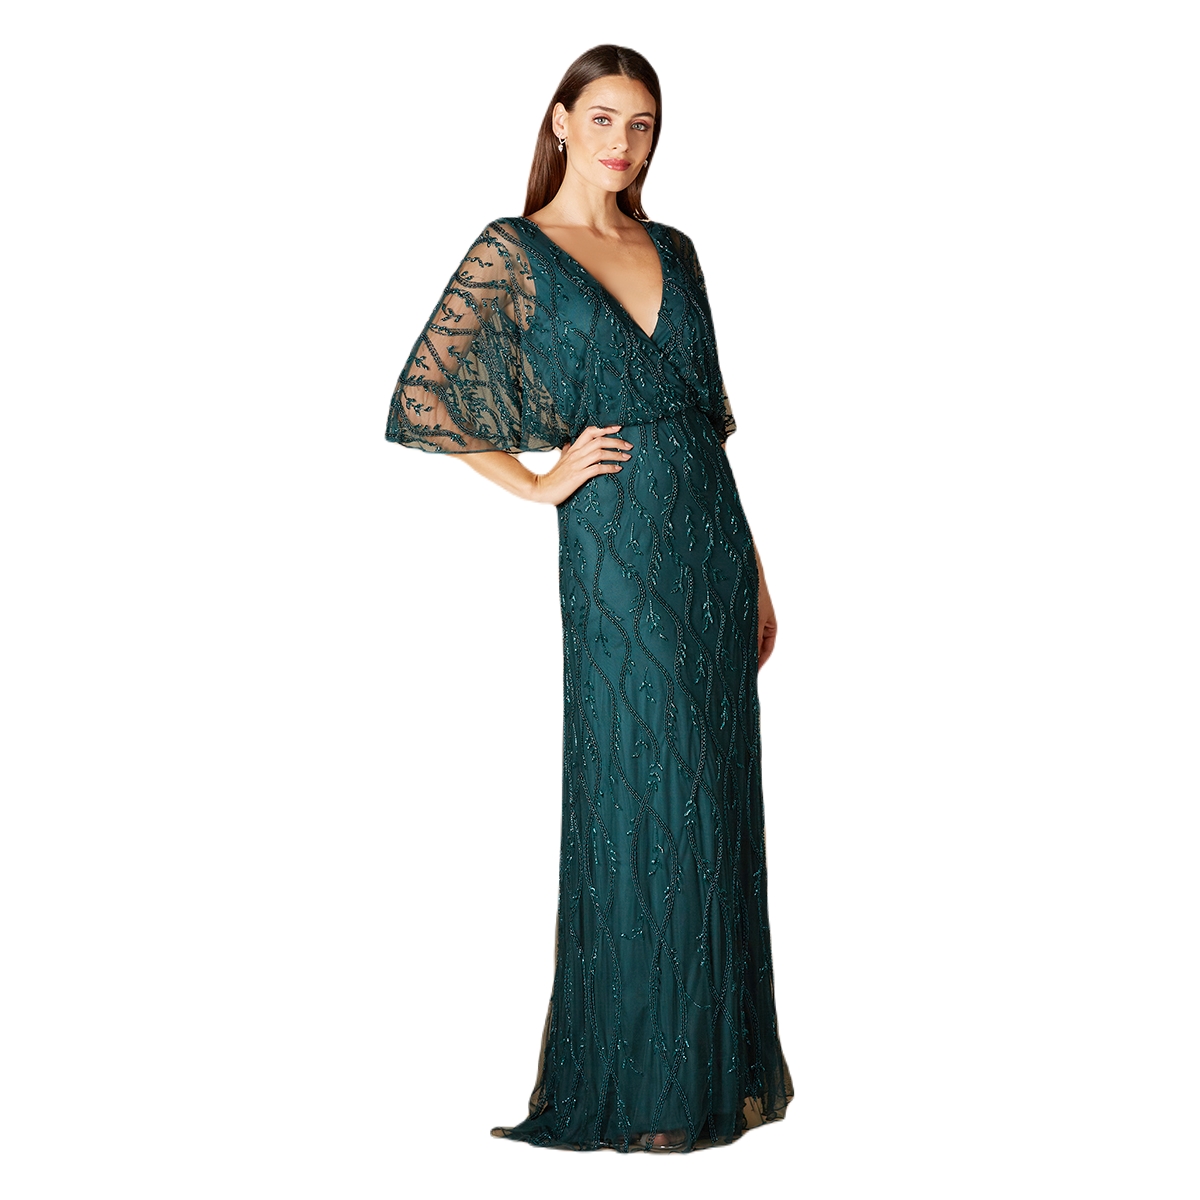 Women's Illusion Cape Sleeve Beaded Gown - Champagne